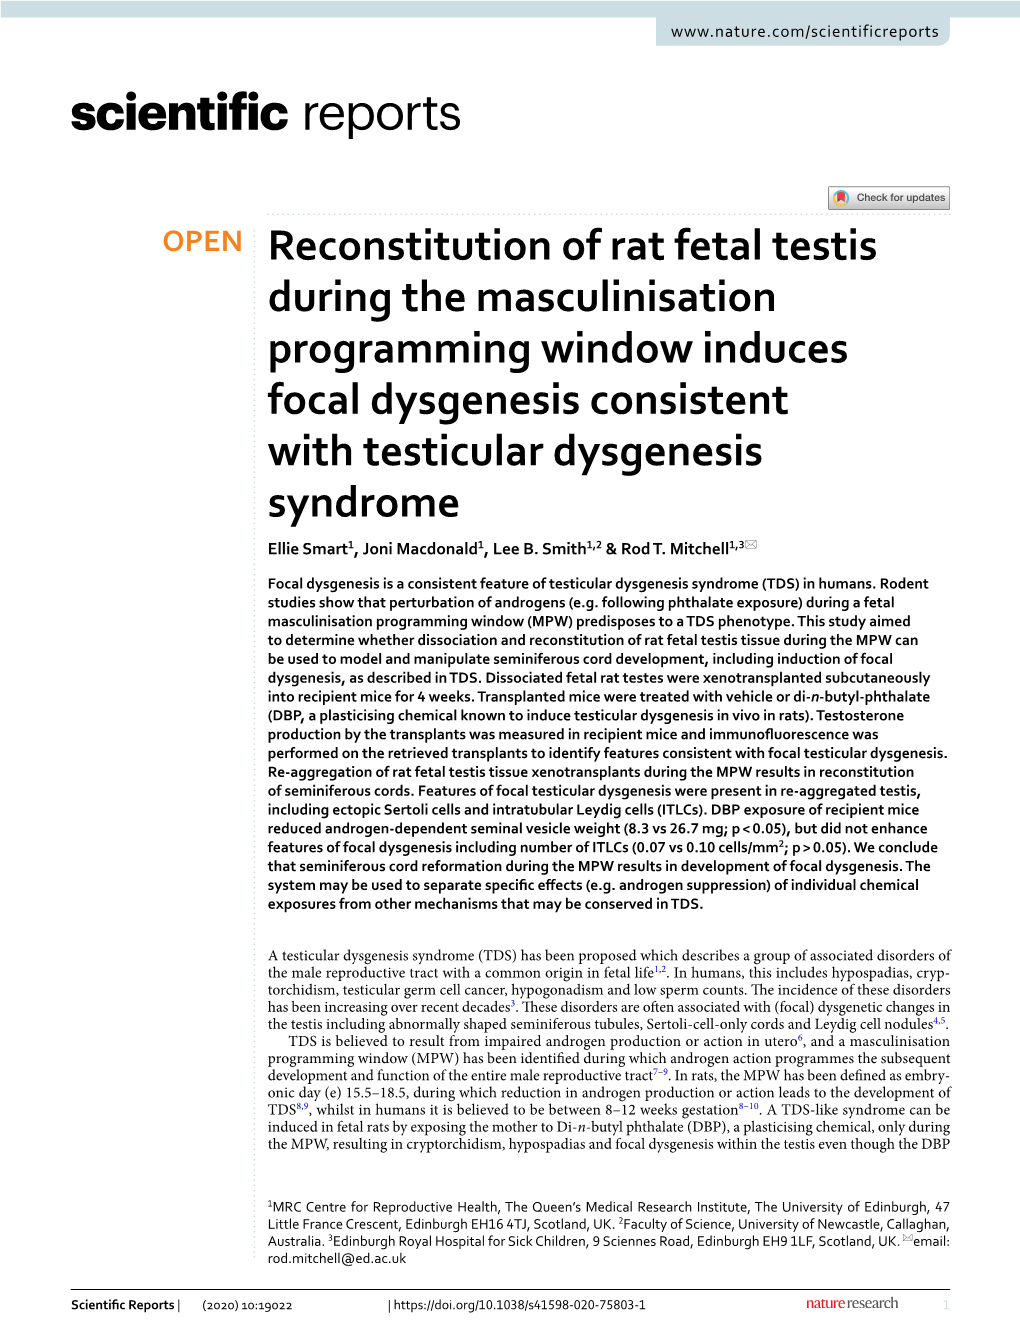 Reconstitution of Rat Fetal Testis During the Masculinisation Programming